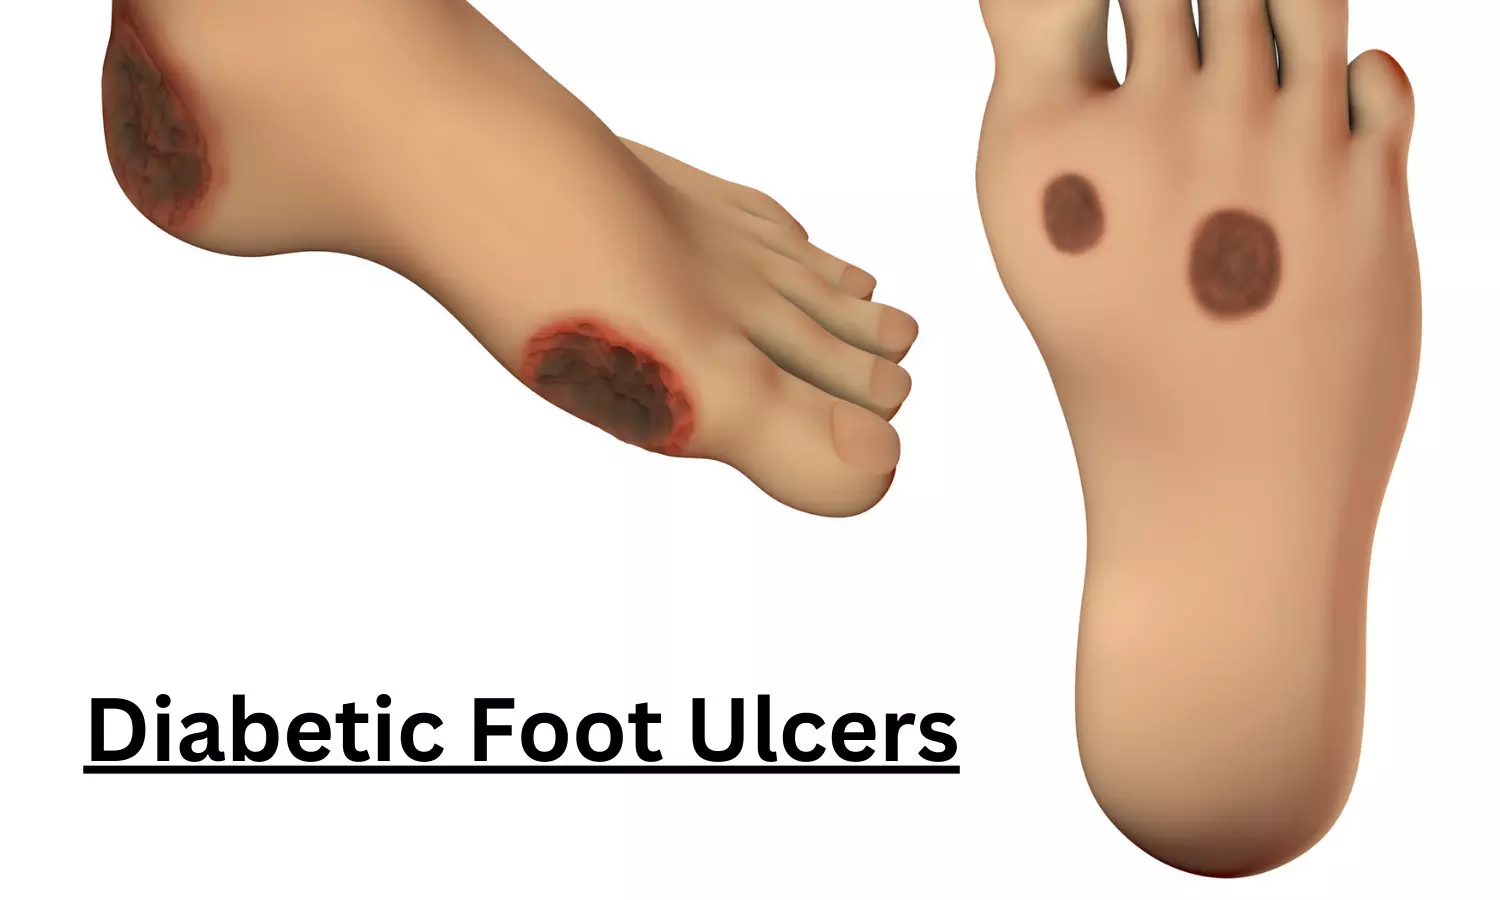 Woman with diabetic foot ulcer and osteomyelitis successfully treated with ayurvedic treatment: case report